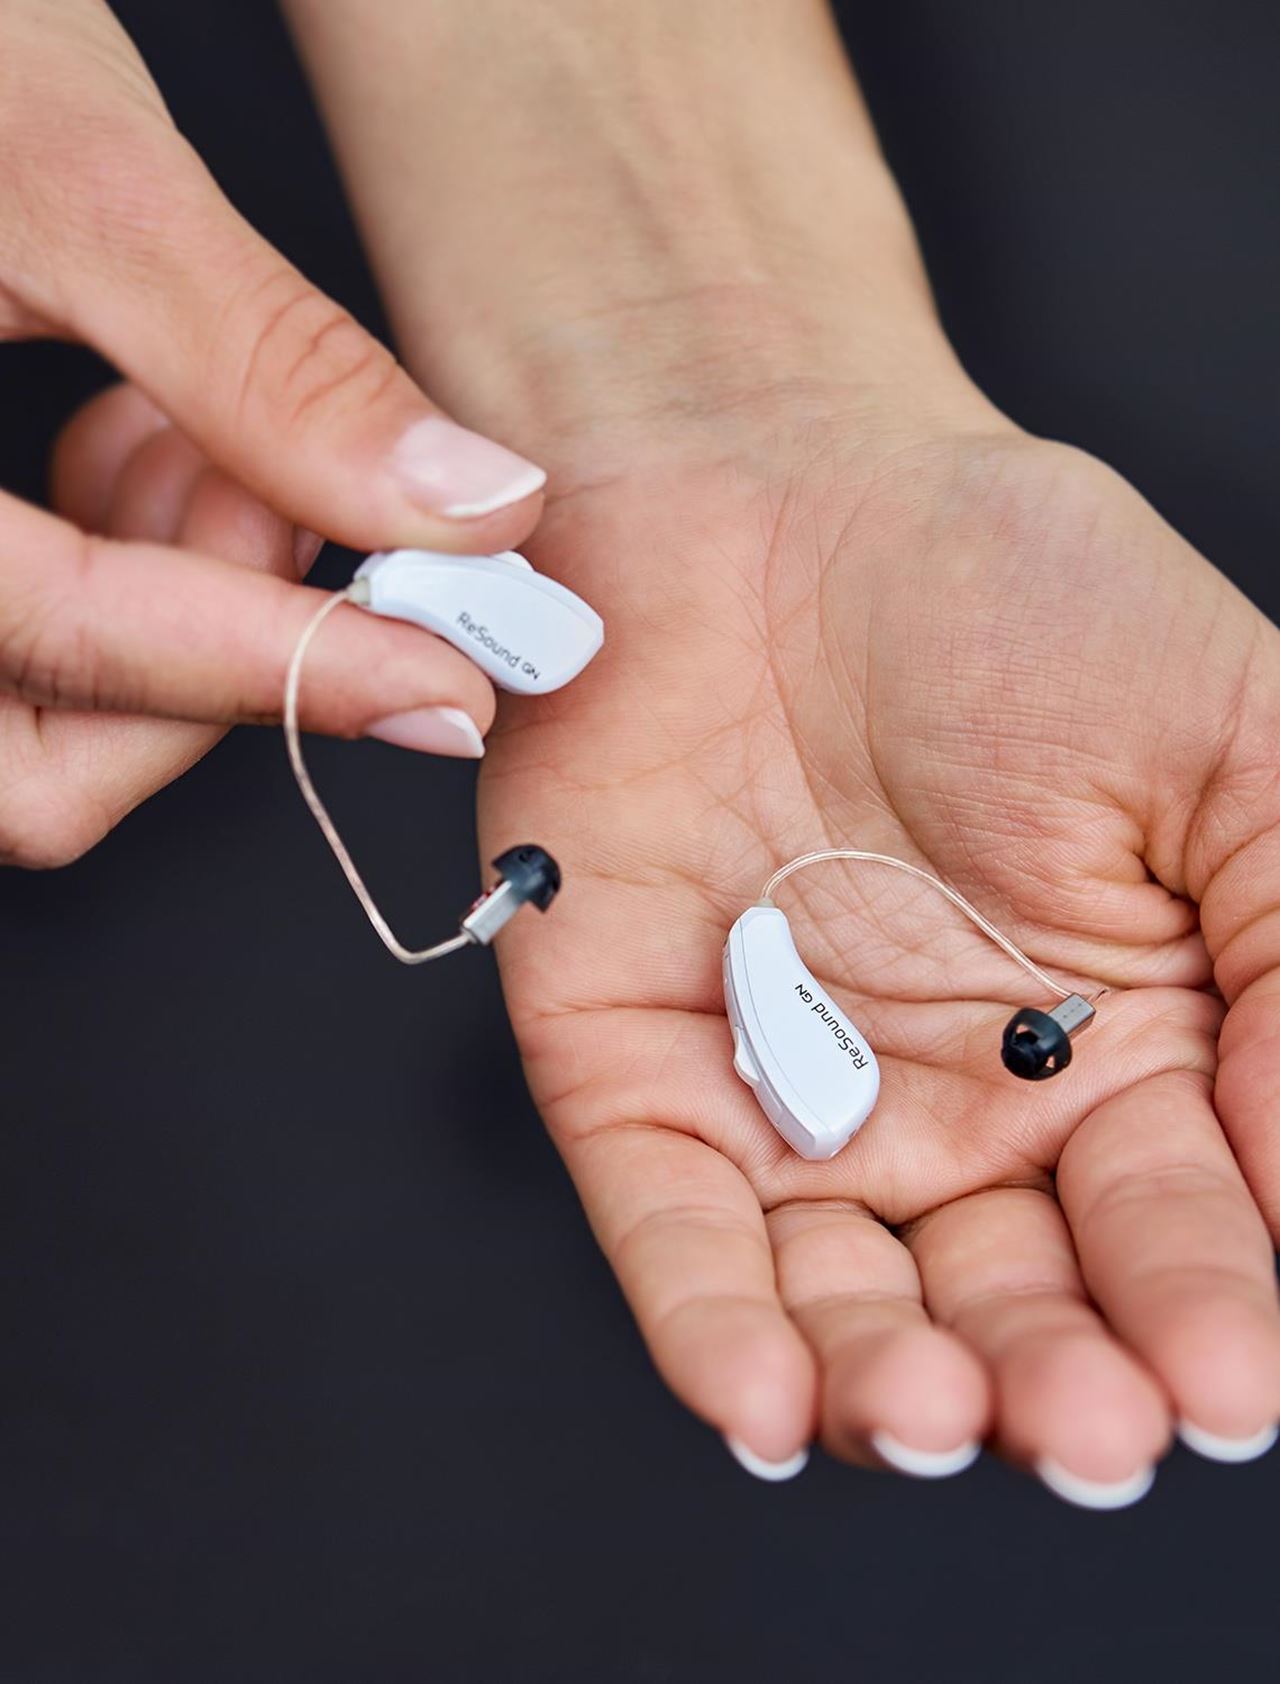 træt Uberettiget i dag Learn about the best hearing aids for tinnitus masking. | ReSound US